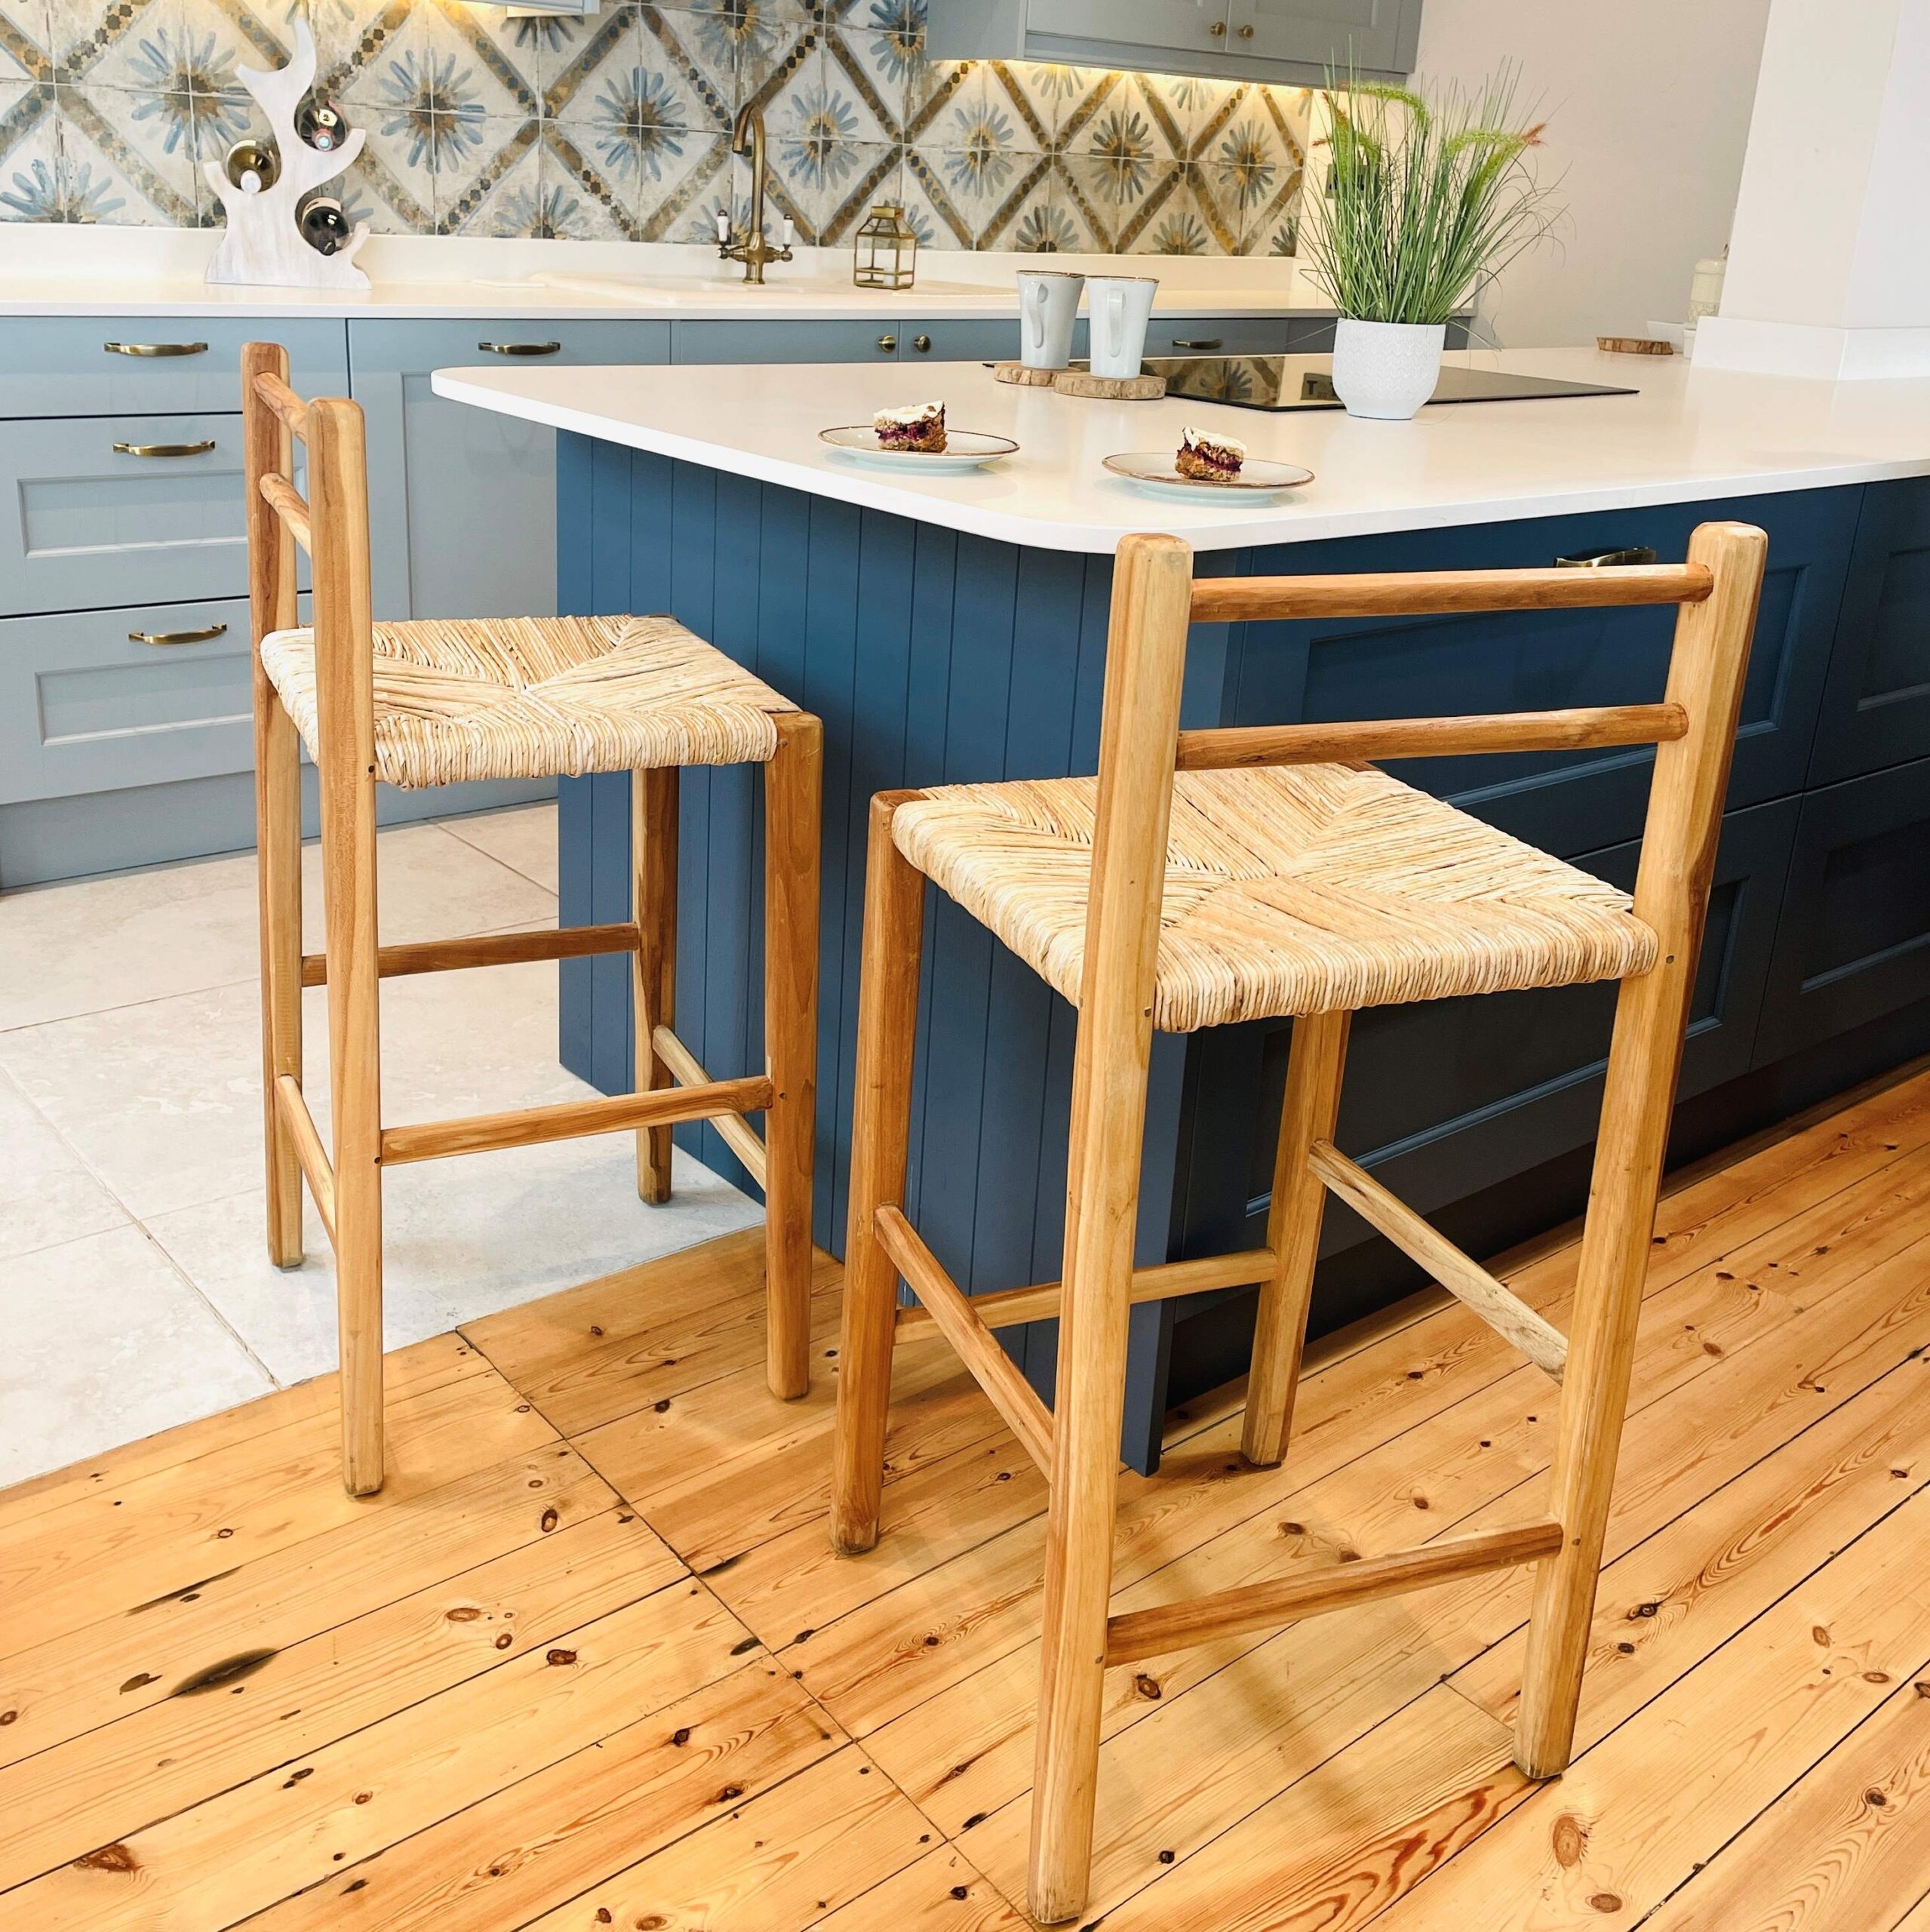 Two wicker kitchen stools in front of blue kitchen island